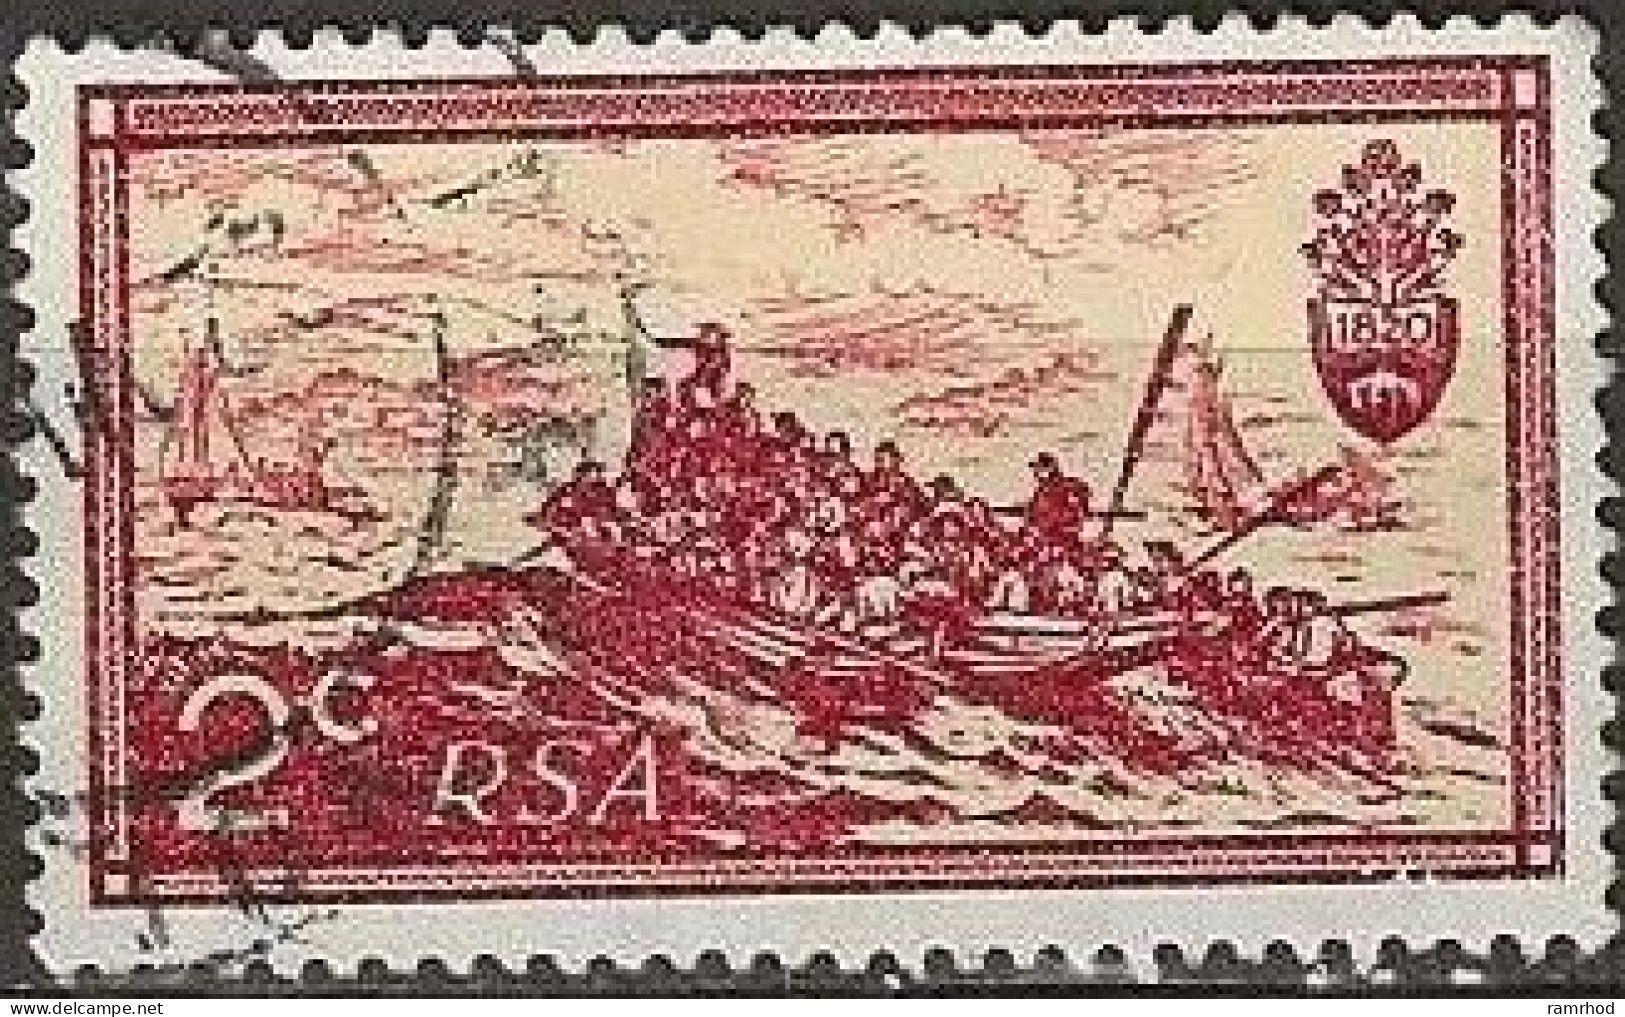 SOUTH AFRICA 1971 Tenth Anniversary Of Republic Of South Africa. - 2c Landing Of British Settlers, 1820 (T. Baines) FU - Gebraucht